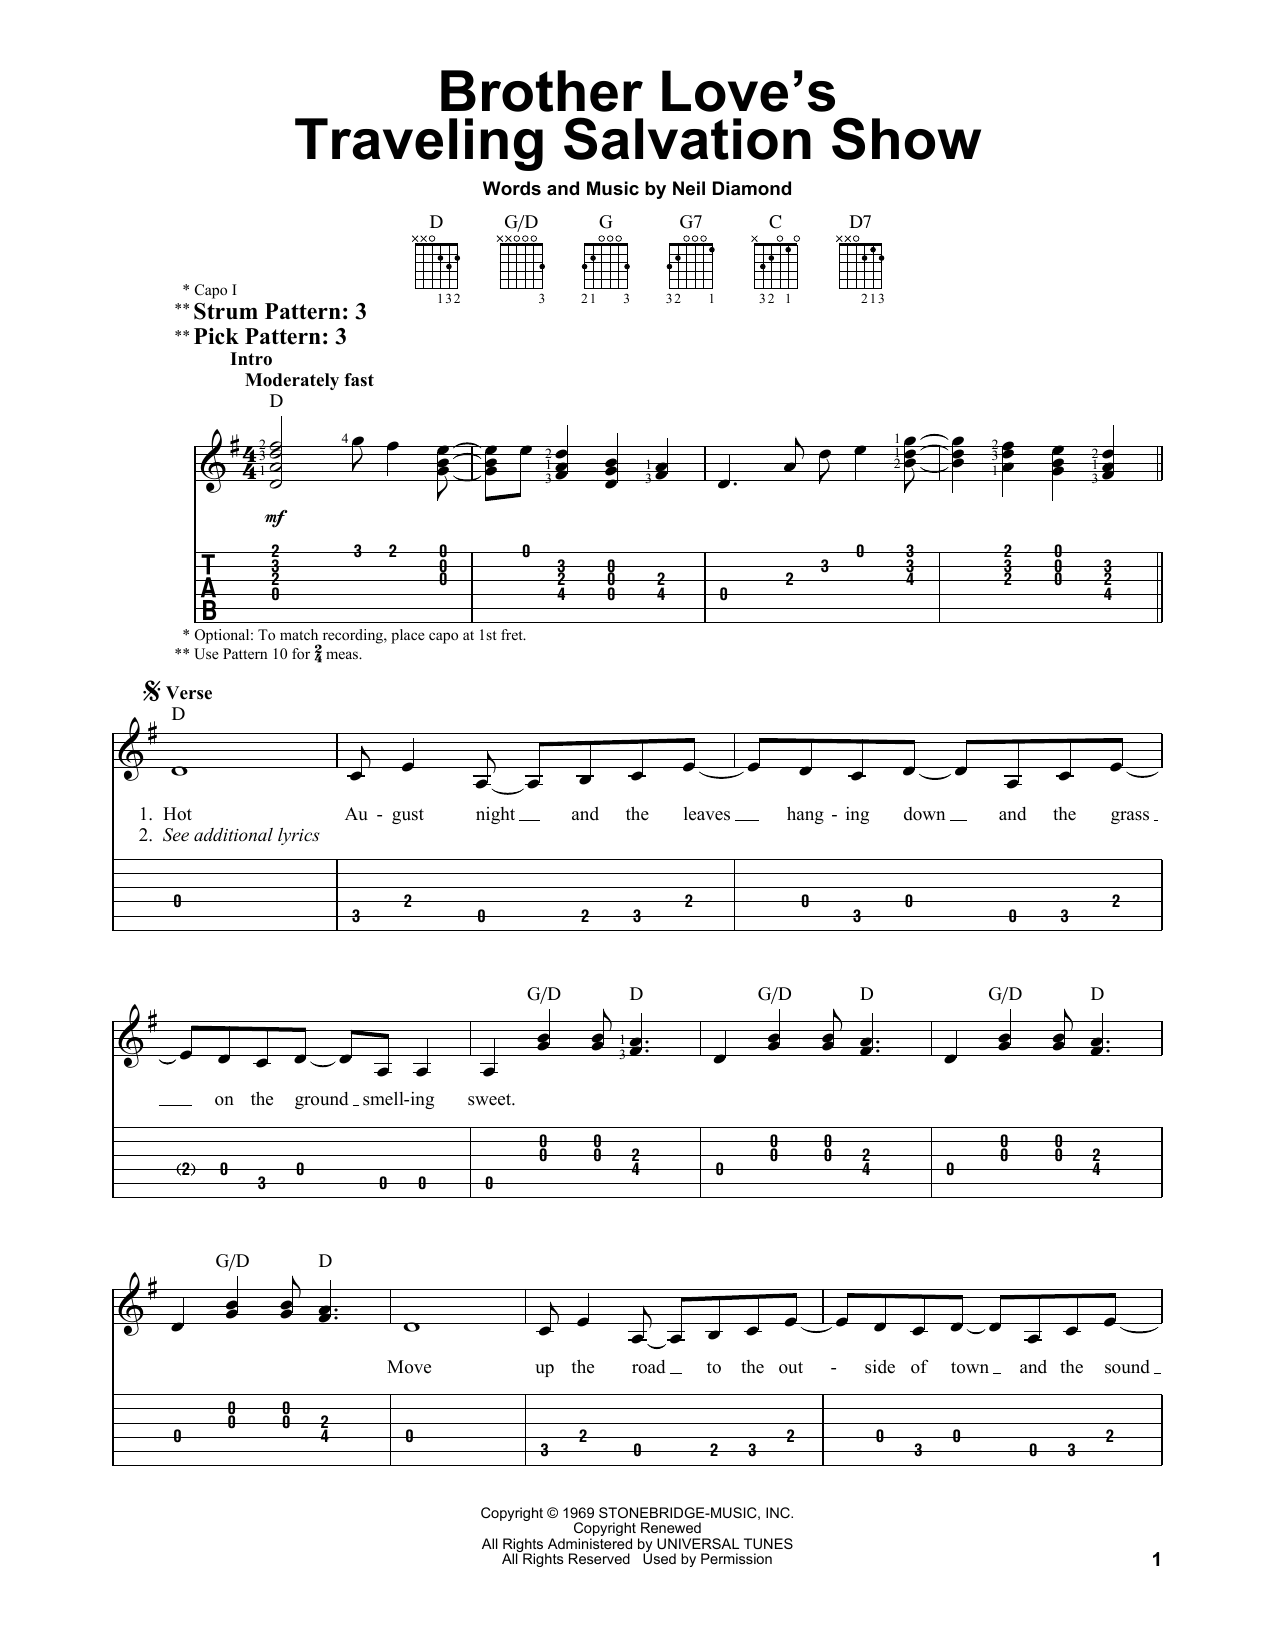 Download Neil Diamond Brother Love's Traveling Salvation Show Sheet Music